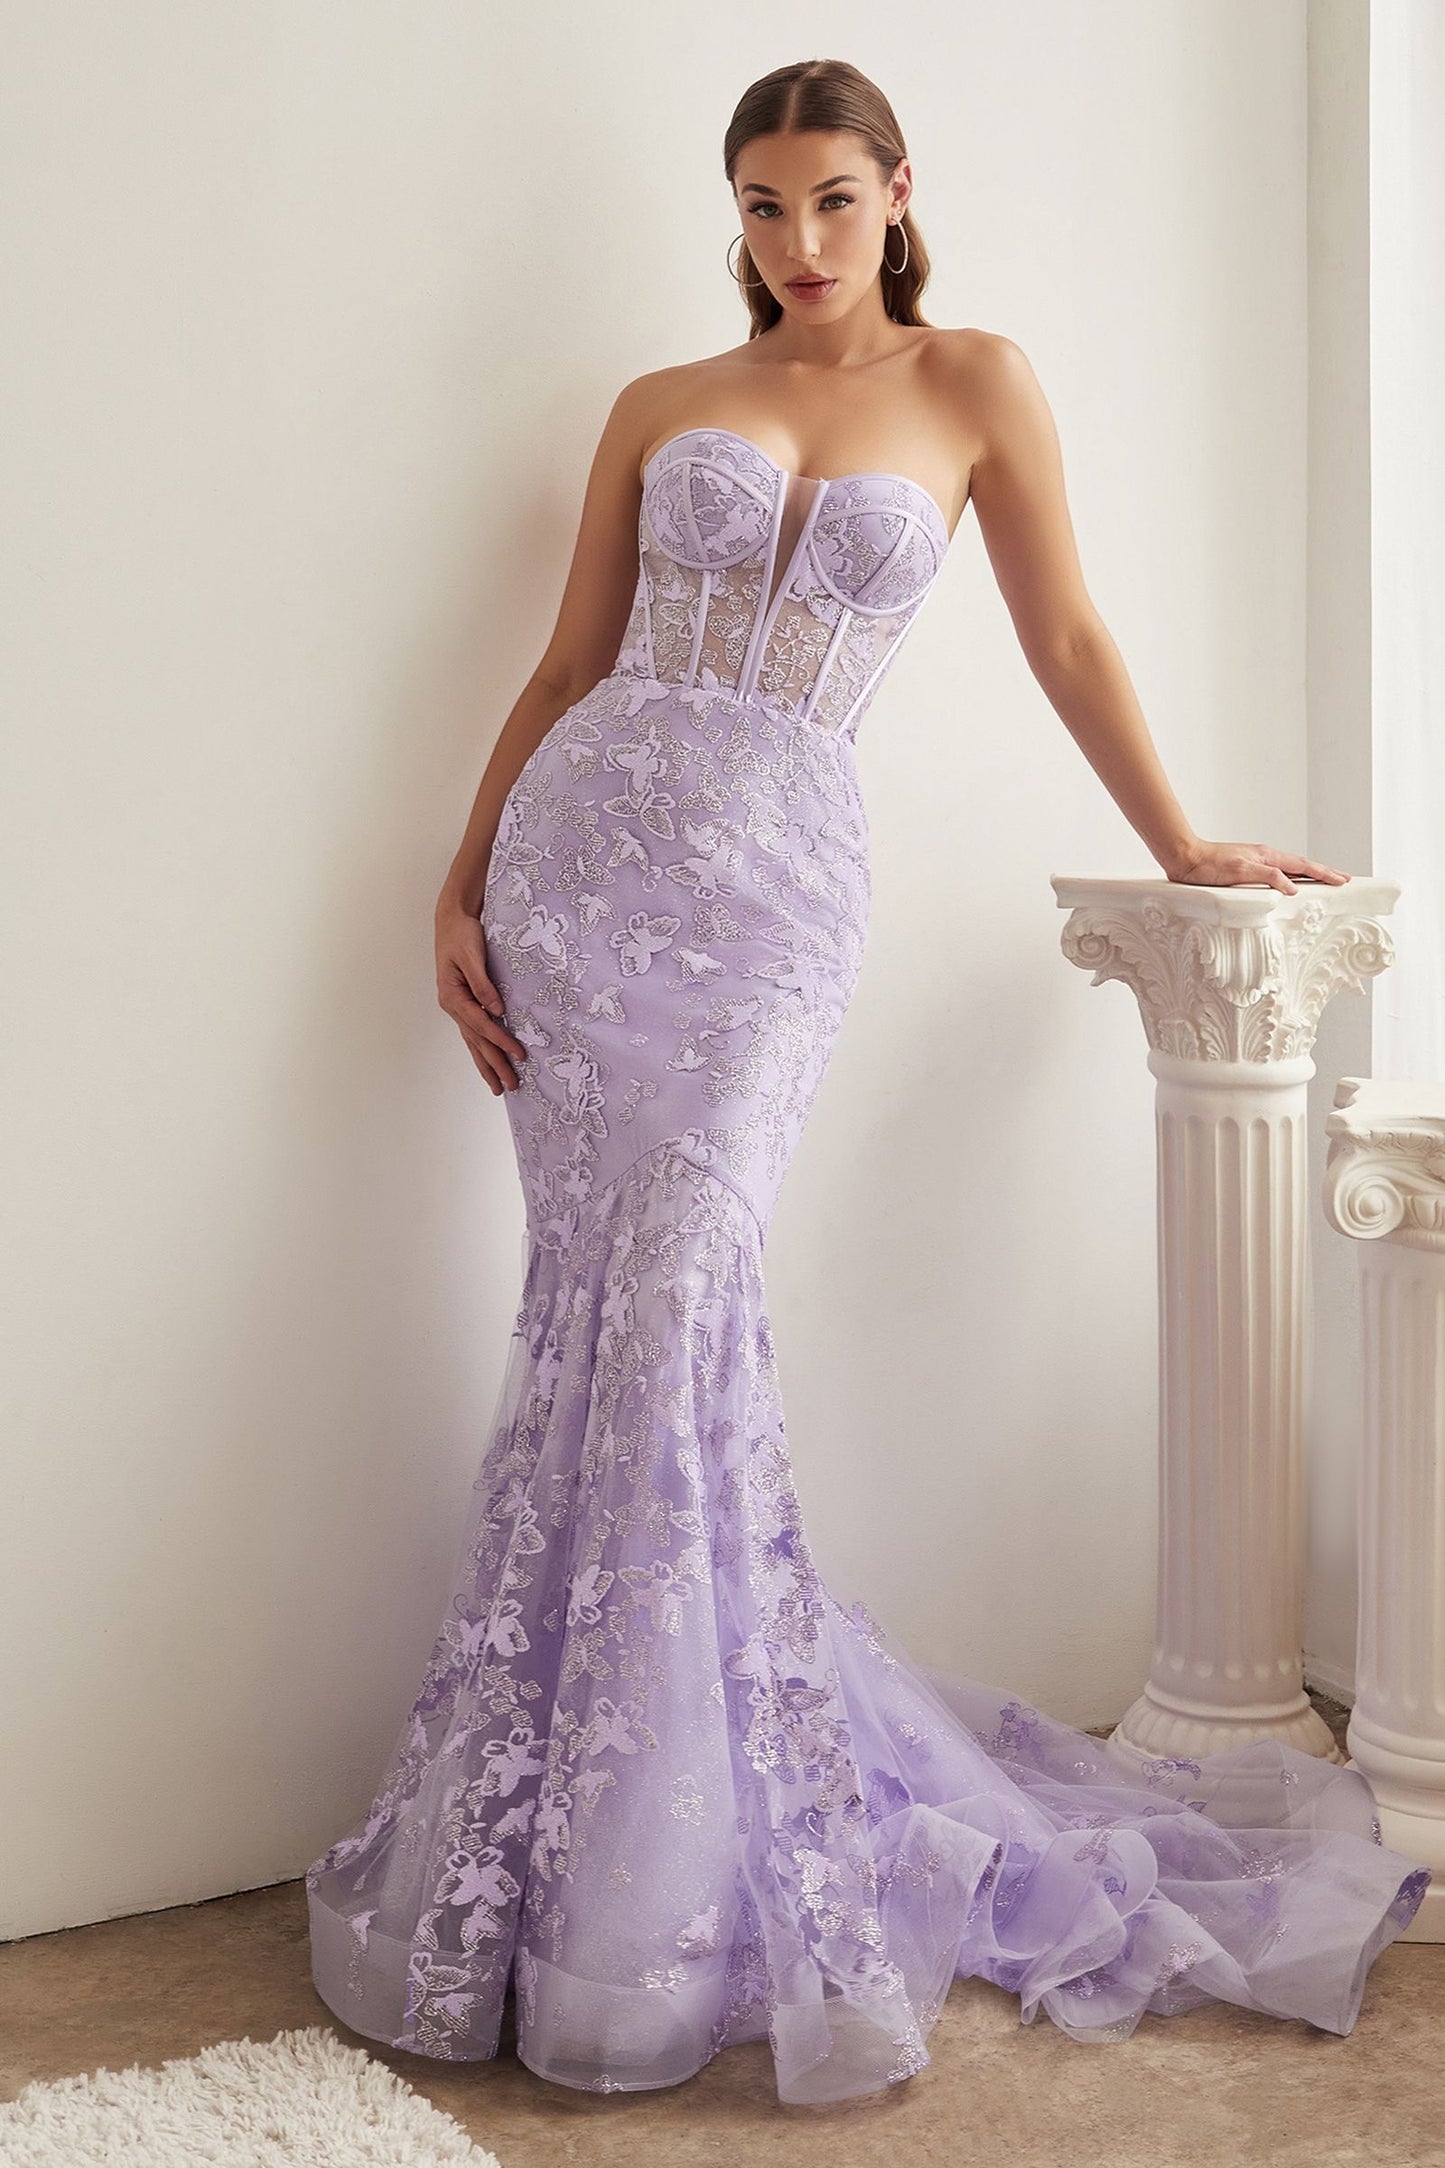 The Aranza Strapless Butterfly Print Mermaid Gown